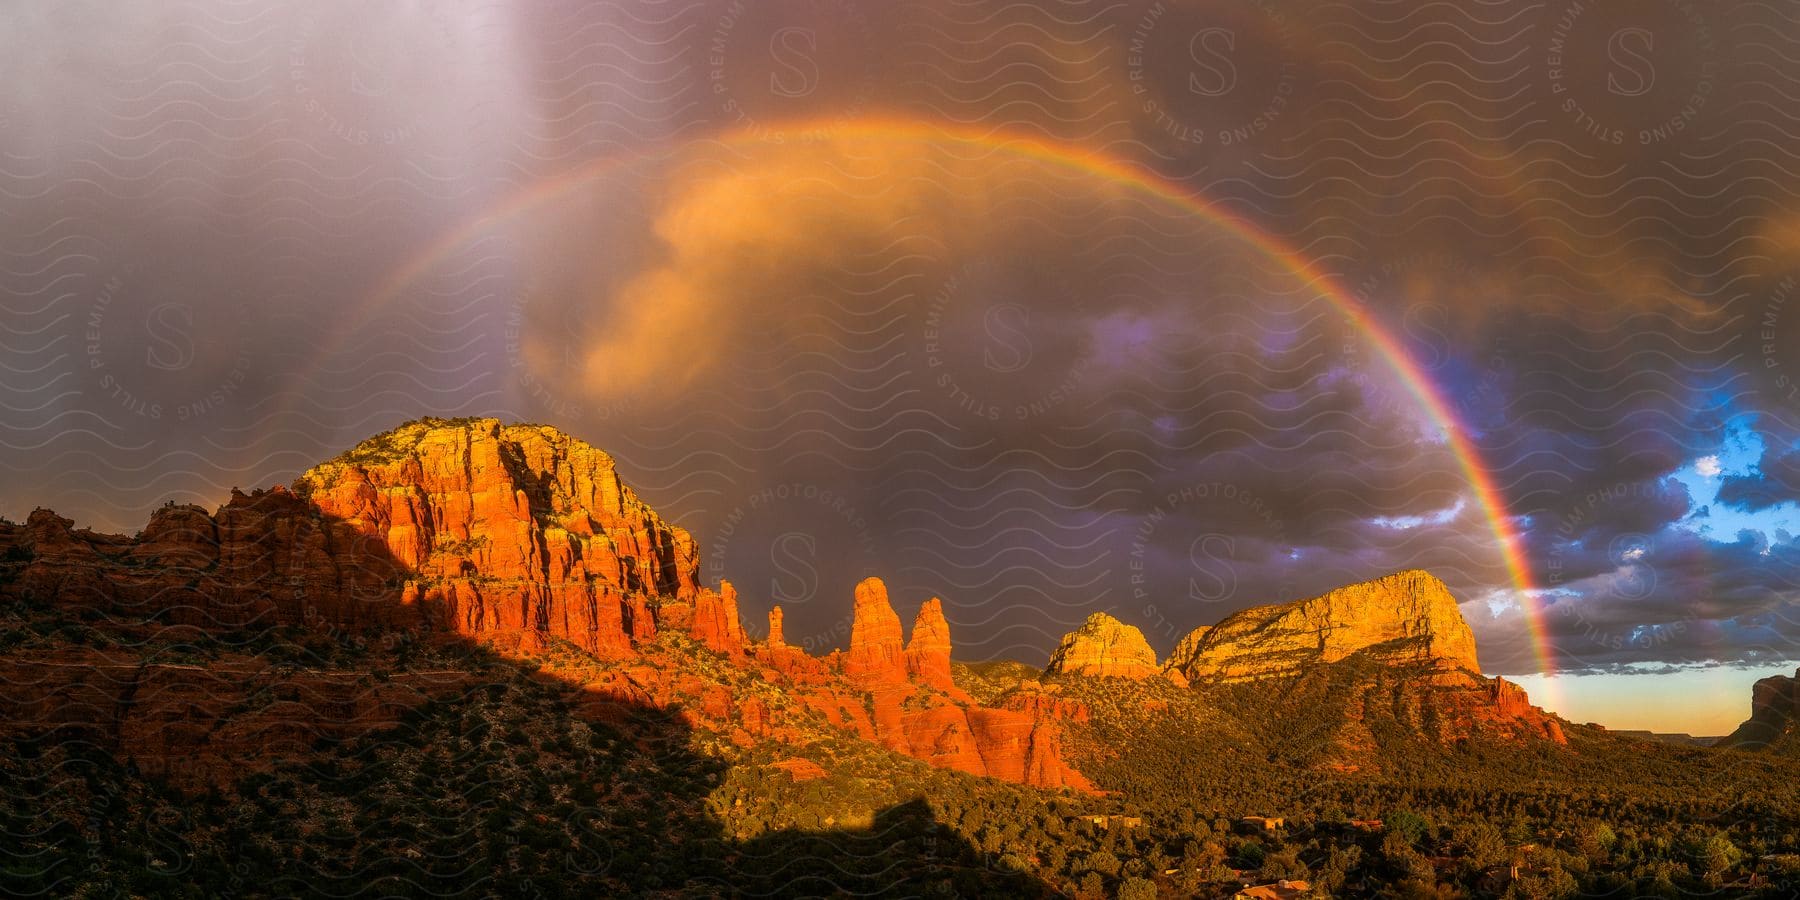 A full rainbow appears over a canyon at sunset with the shadow of the chapel of the holy cross visible at the bottom of the photo